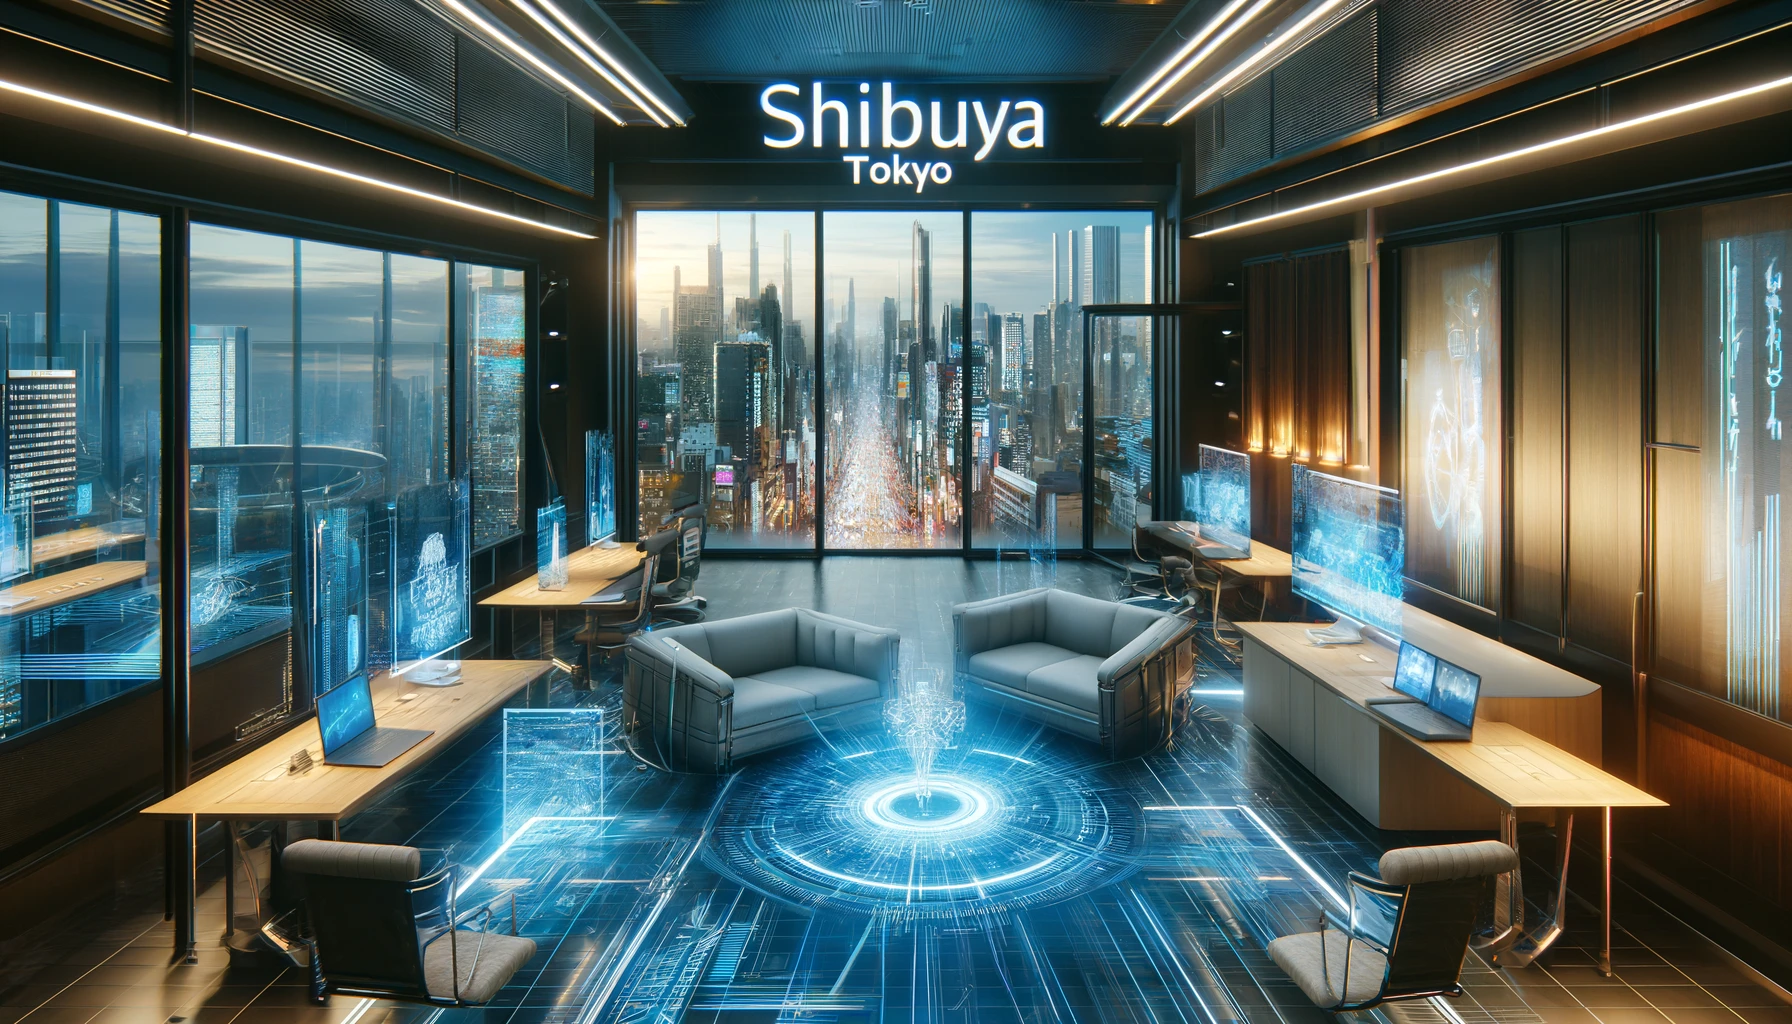 An image of a virtual office located in Shibuya, Tokyo. The scene is modern and high-tech, featuring sleek, futuristic furniture and advanced technology like holographic displays and virtual reality interfaces. The office is spacious and well-lit, with large windows offering a view of the bustling city outside. The walls are decorated with digital art, and there's a comfortable seating area for informal meetings. In the center of the image, the word 'Shibuya' is prominently displayed in stylish, modern font.